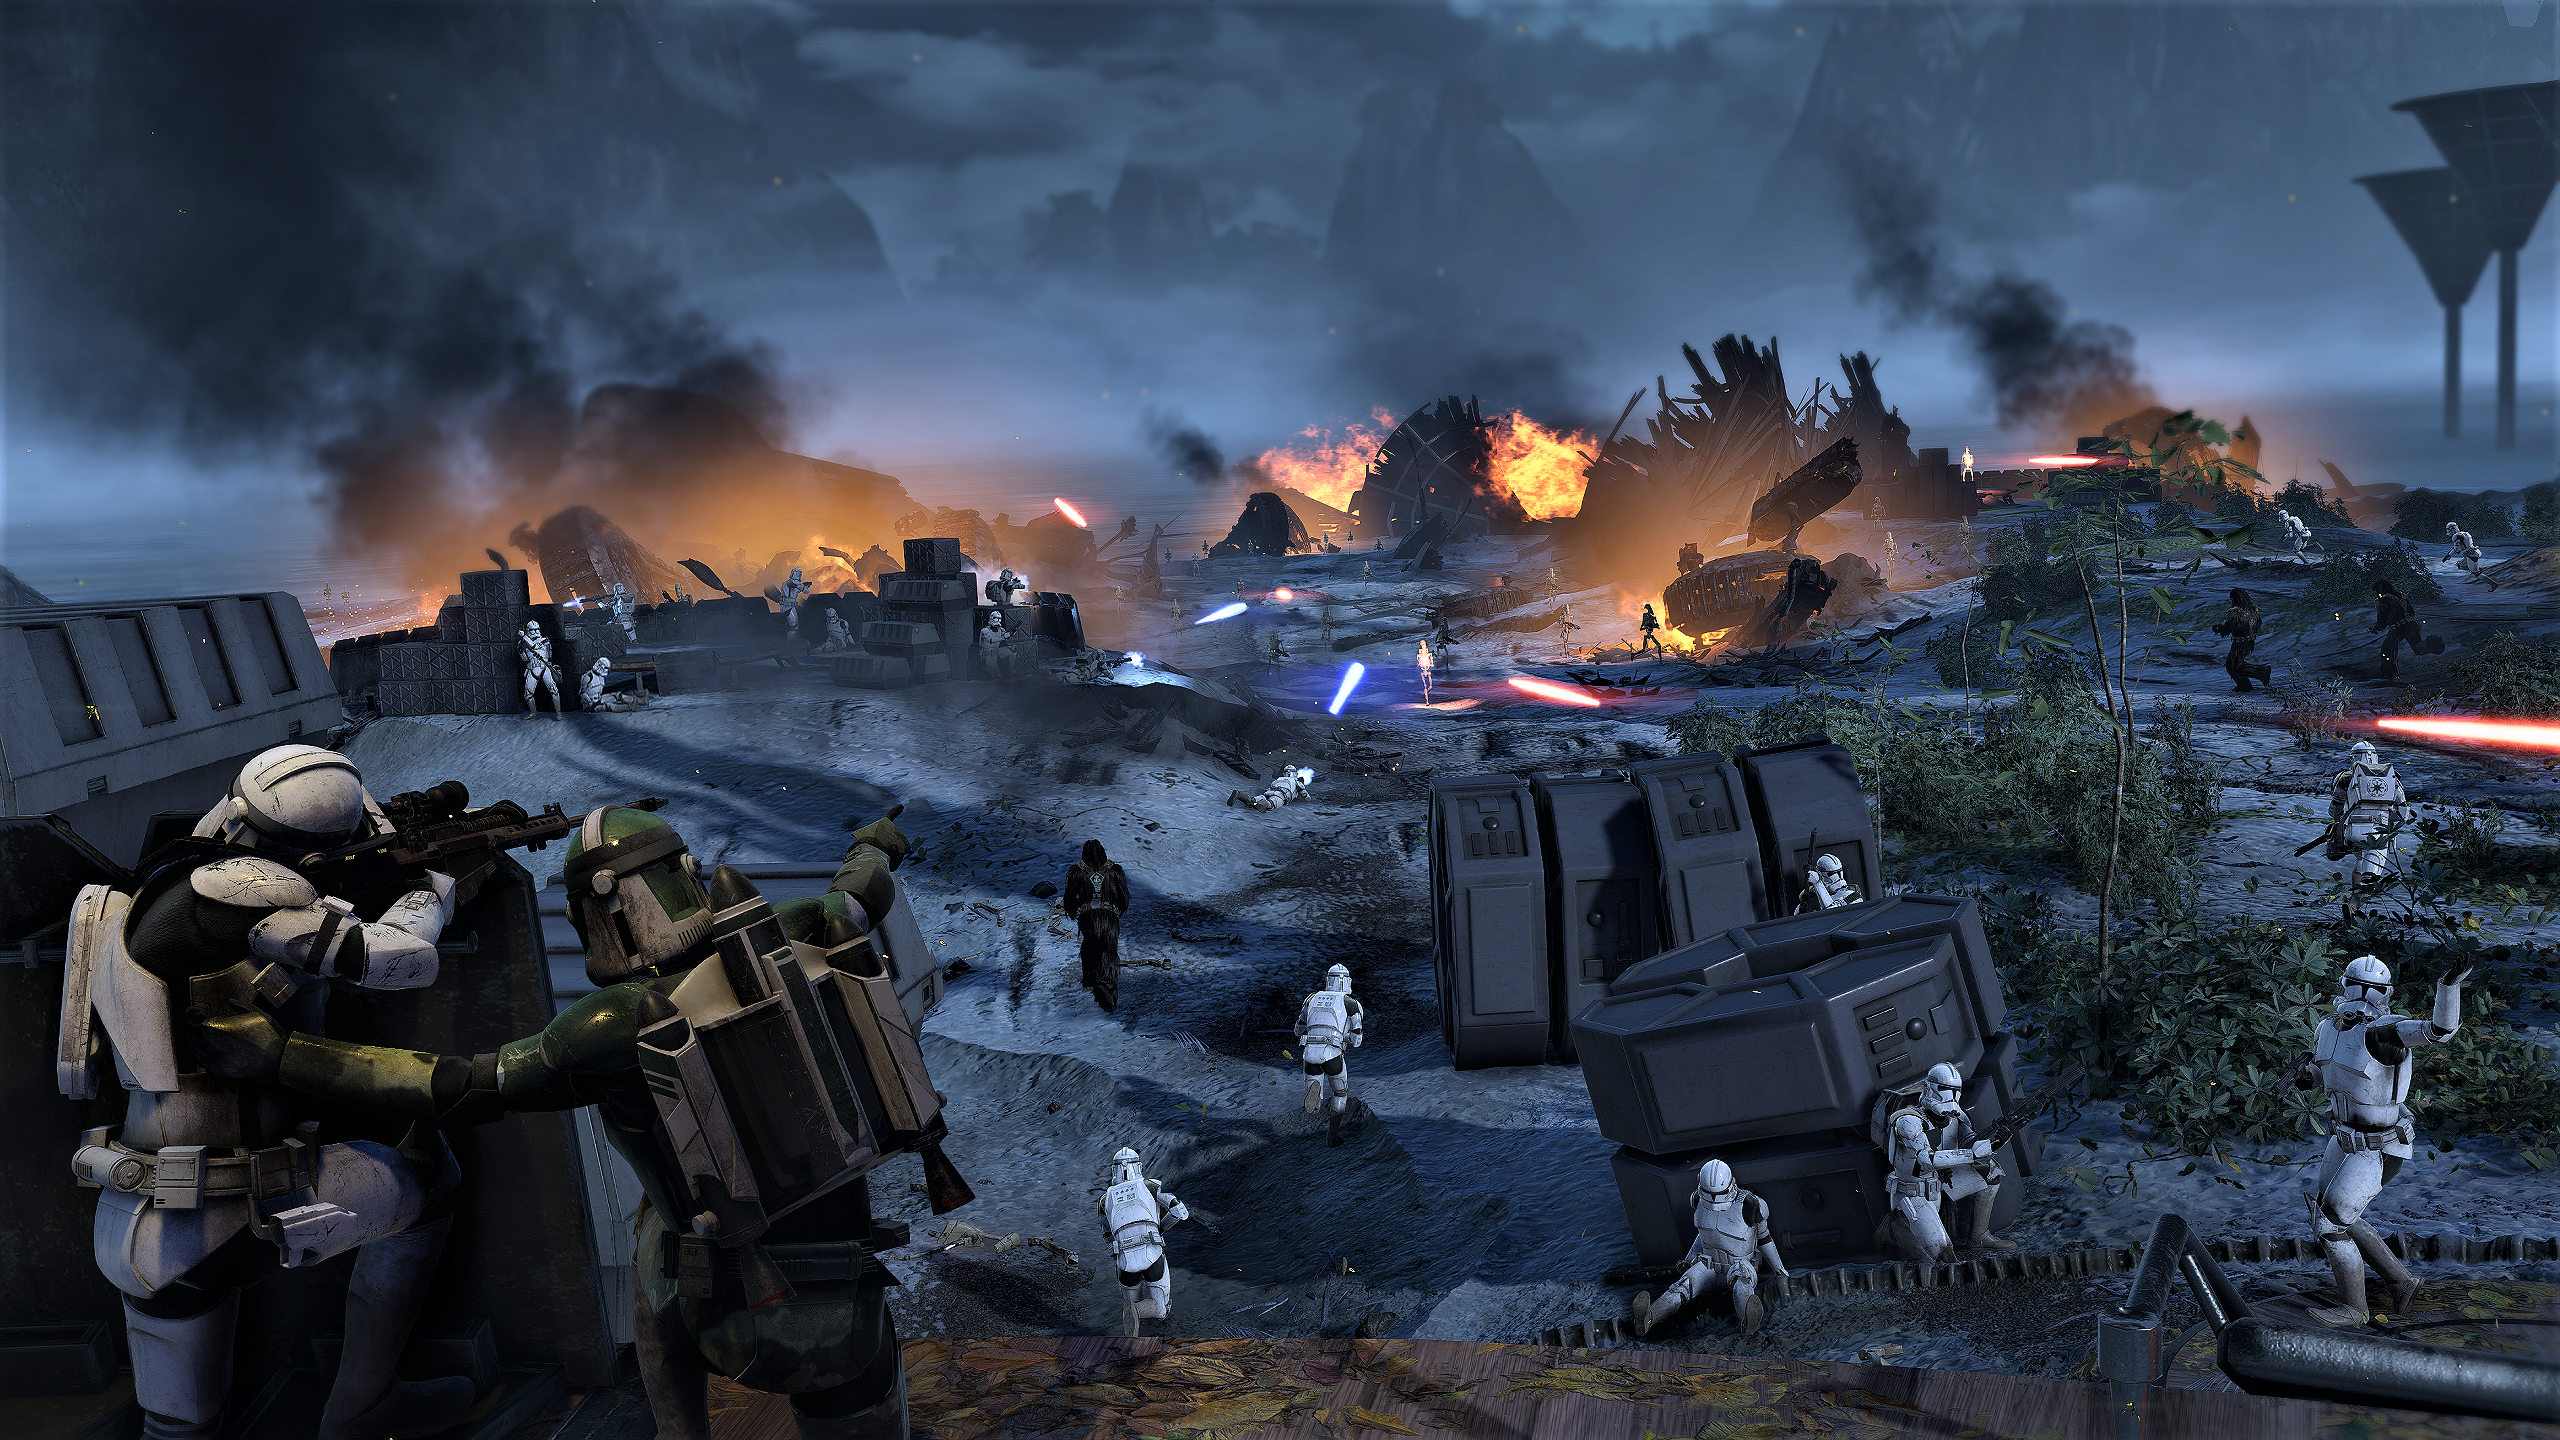 The Battle Of Kashyyyk! Created Using , 15 Custom Animated Poses, And Lots Of Love